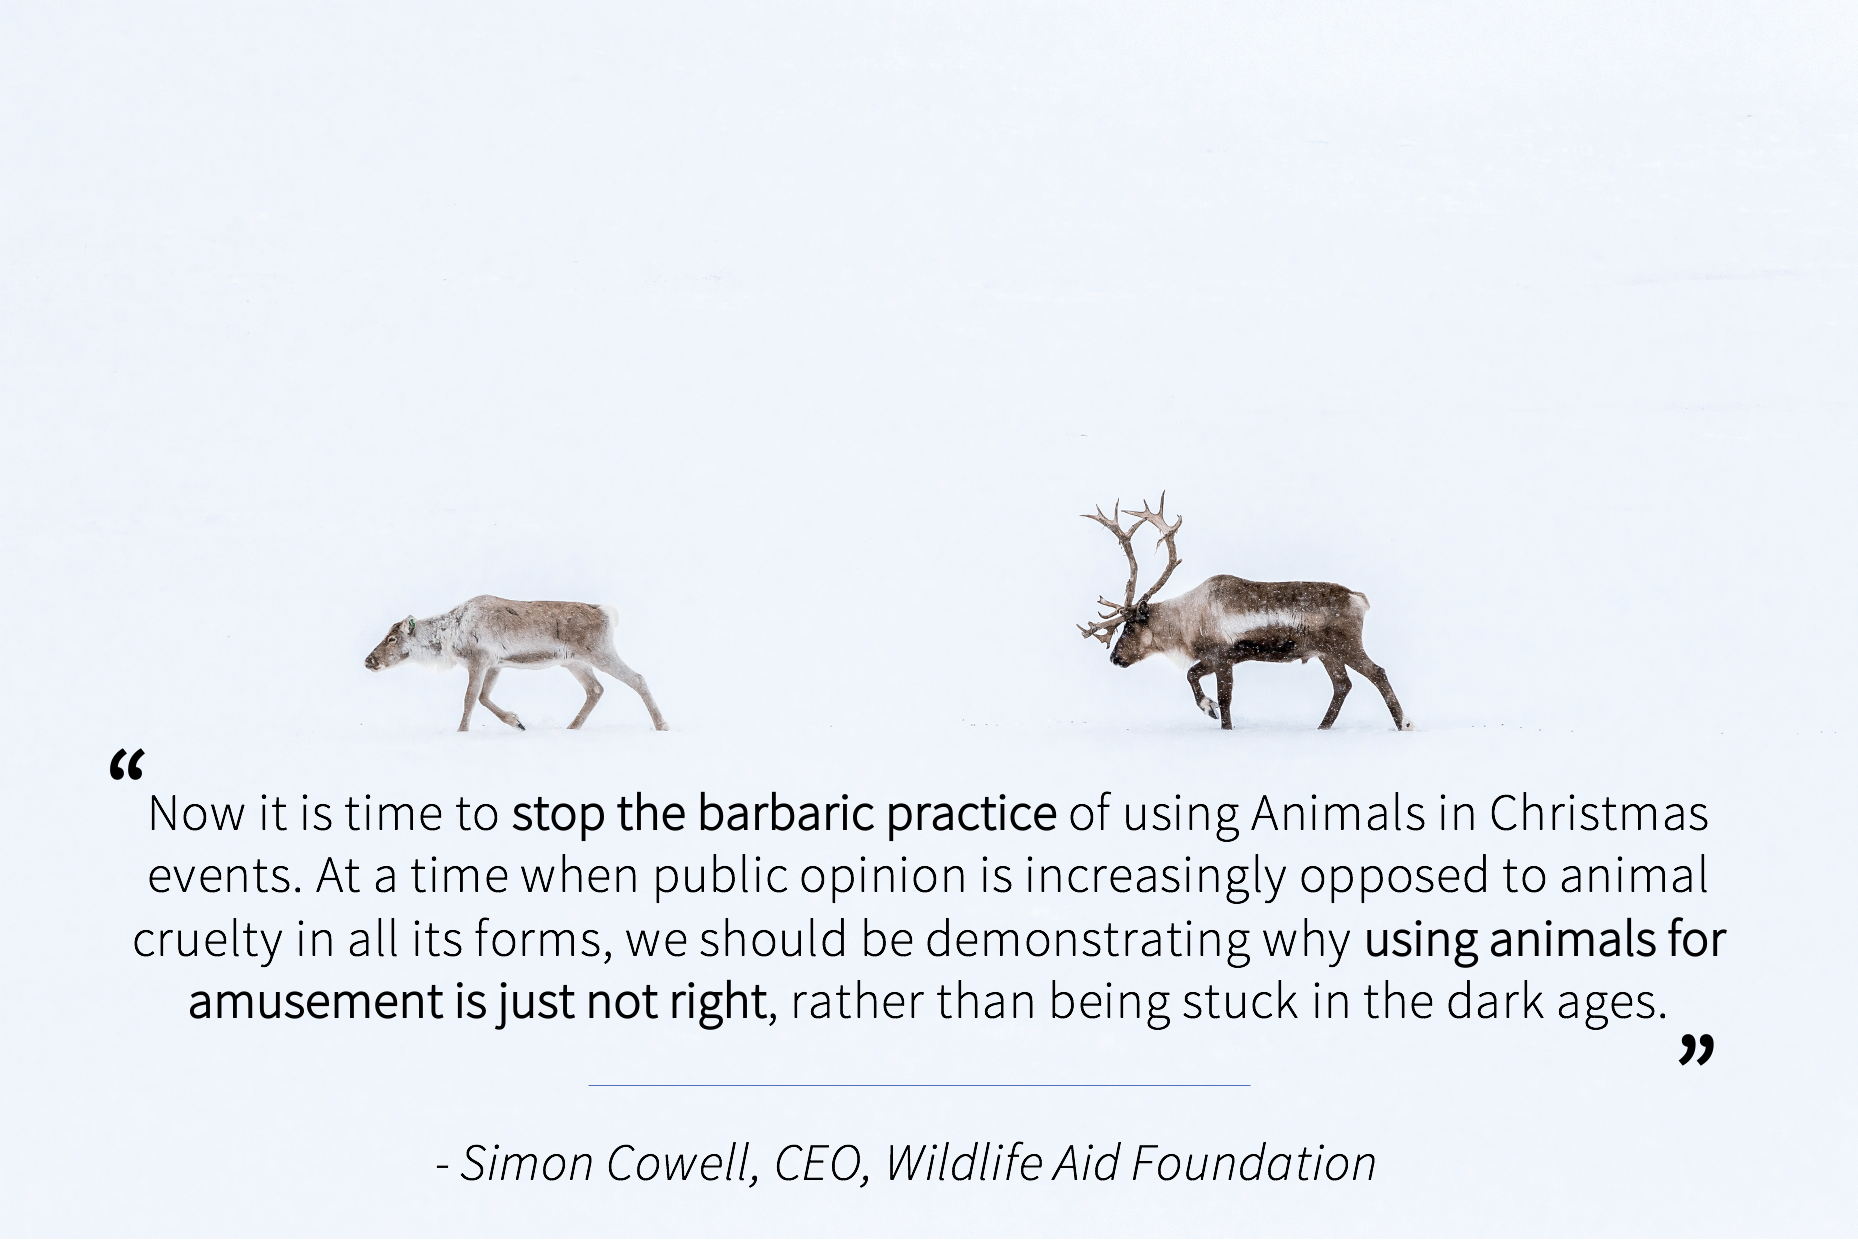 Quote from Simon Cowell - stop using animals in Christmas events